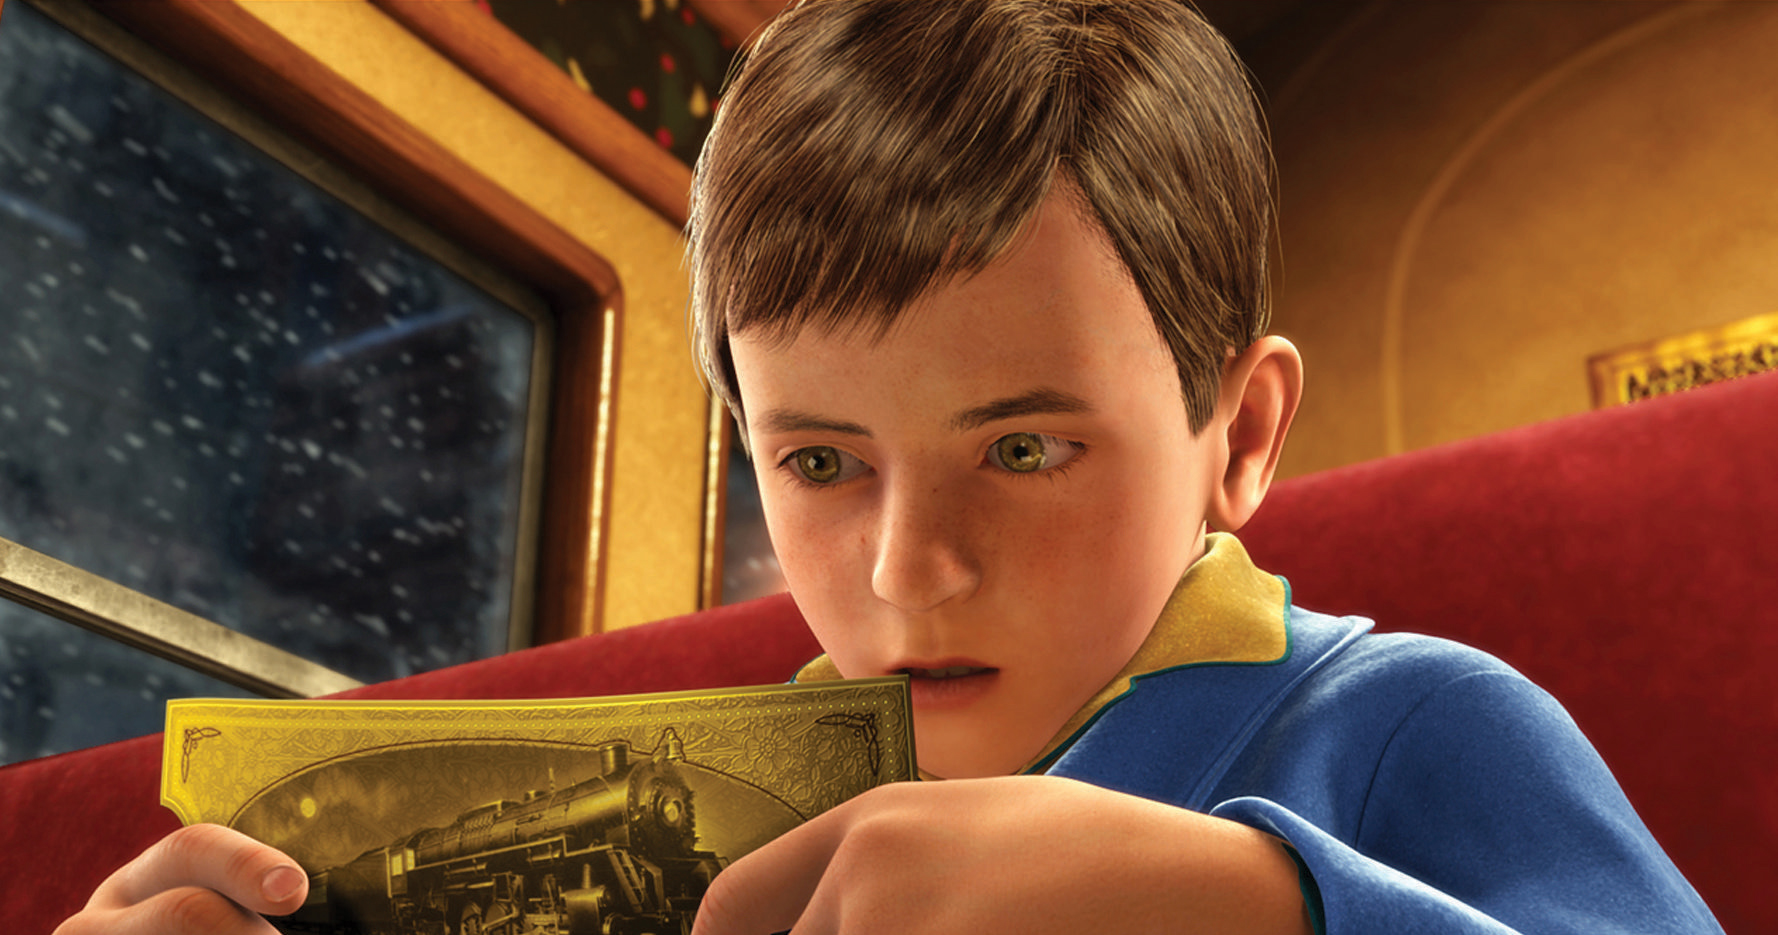 The Polar Express - Playing at Union Station's Extreme Screen Theatre